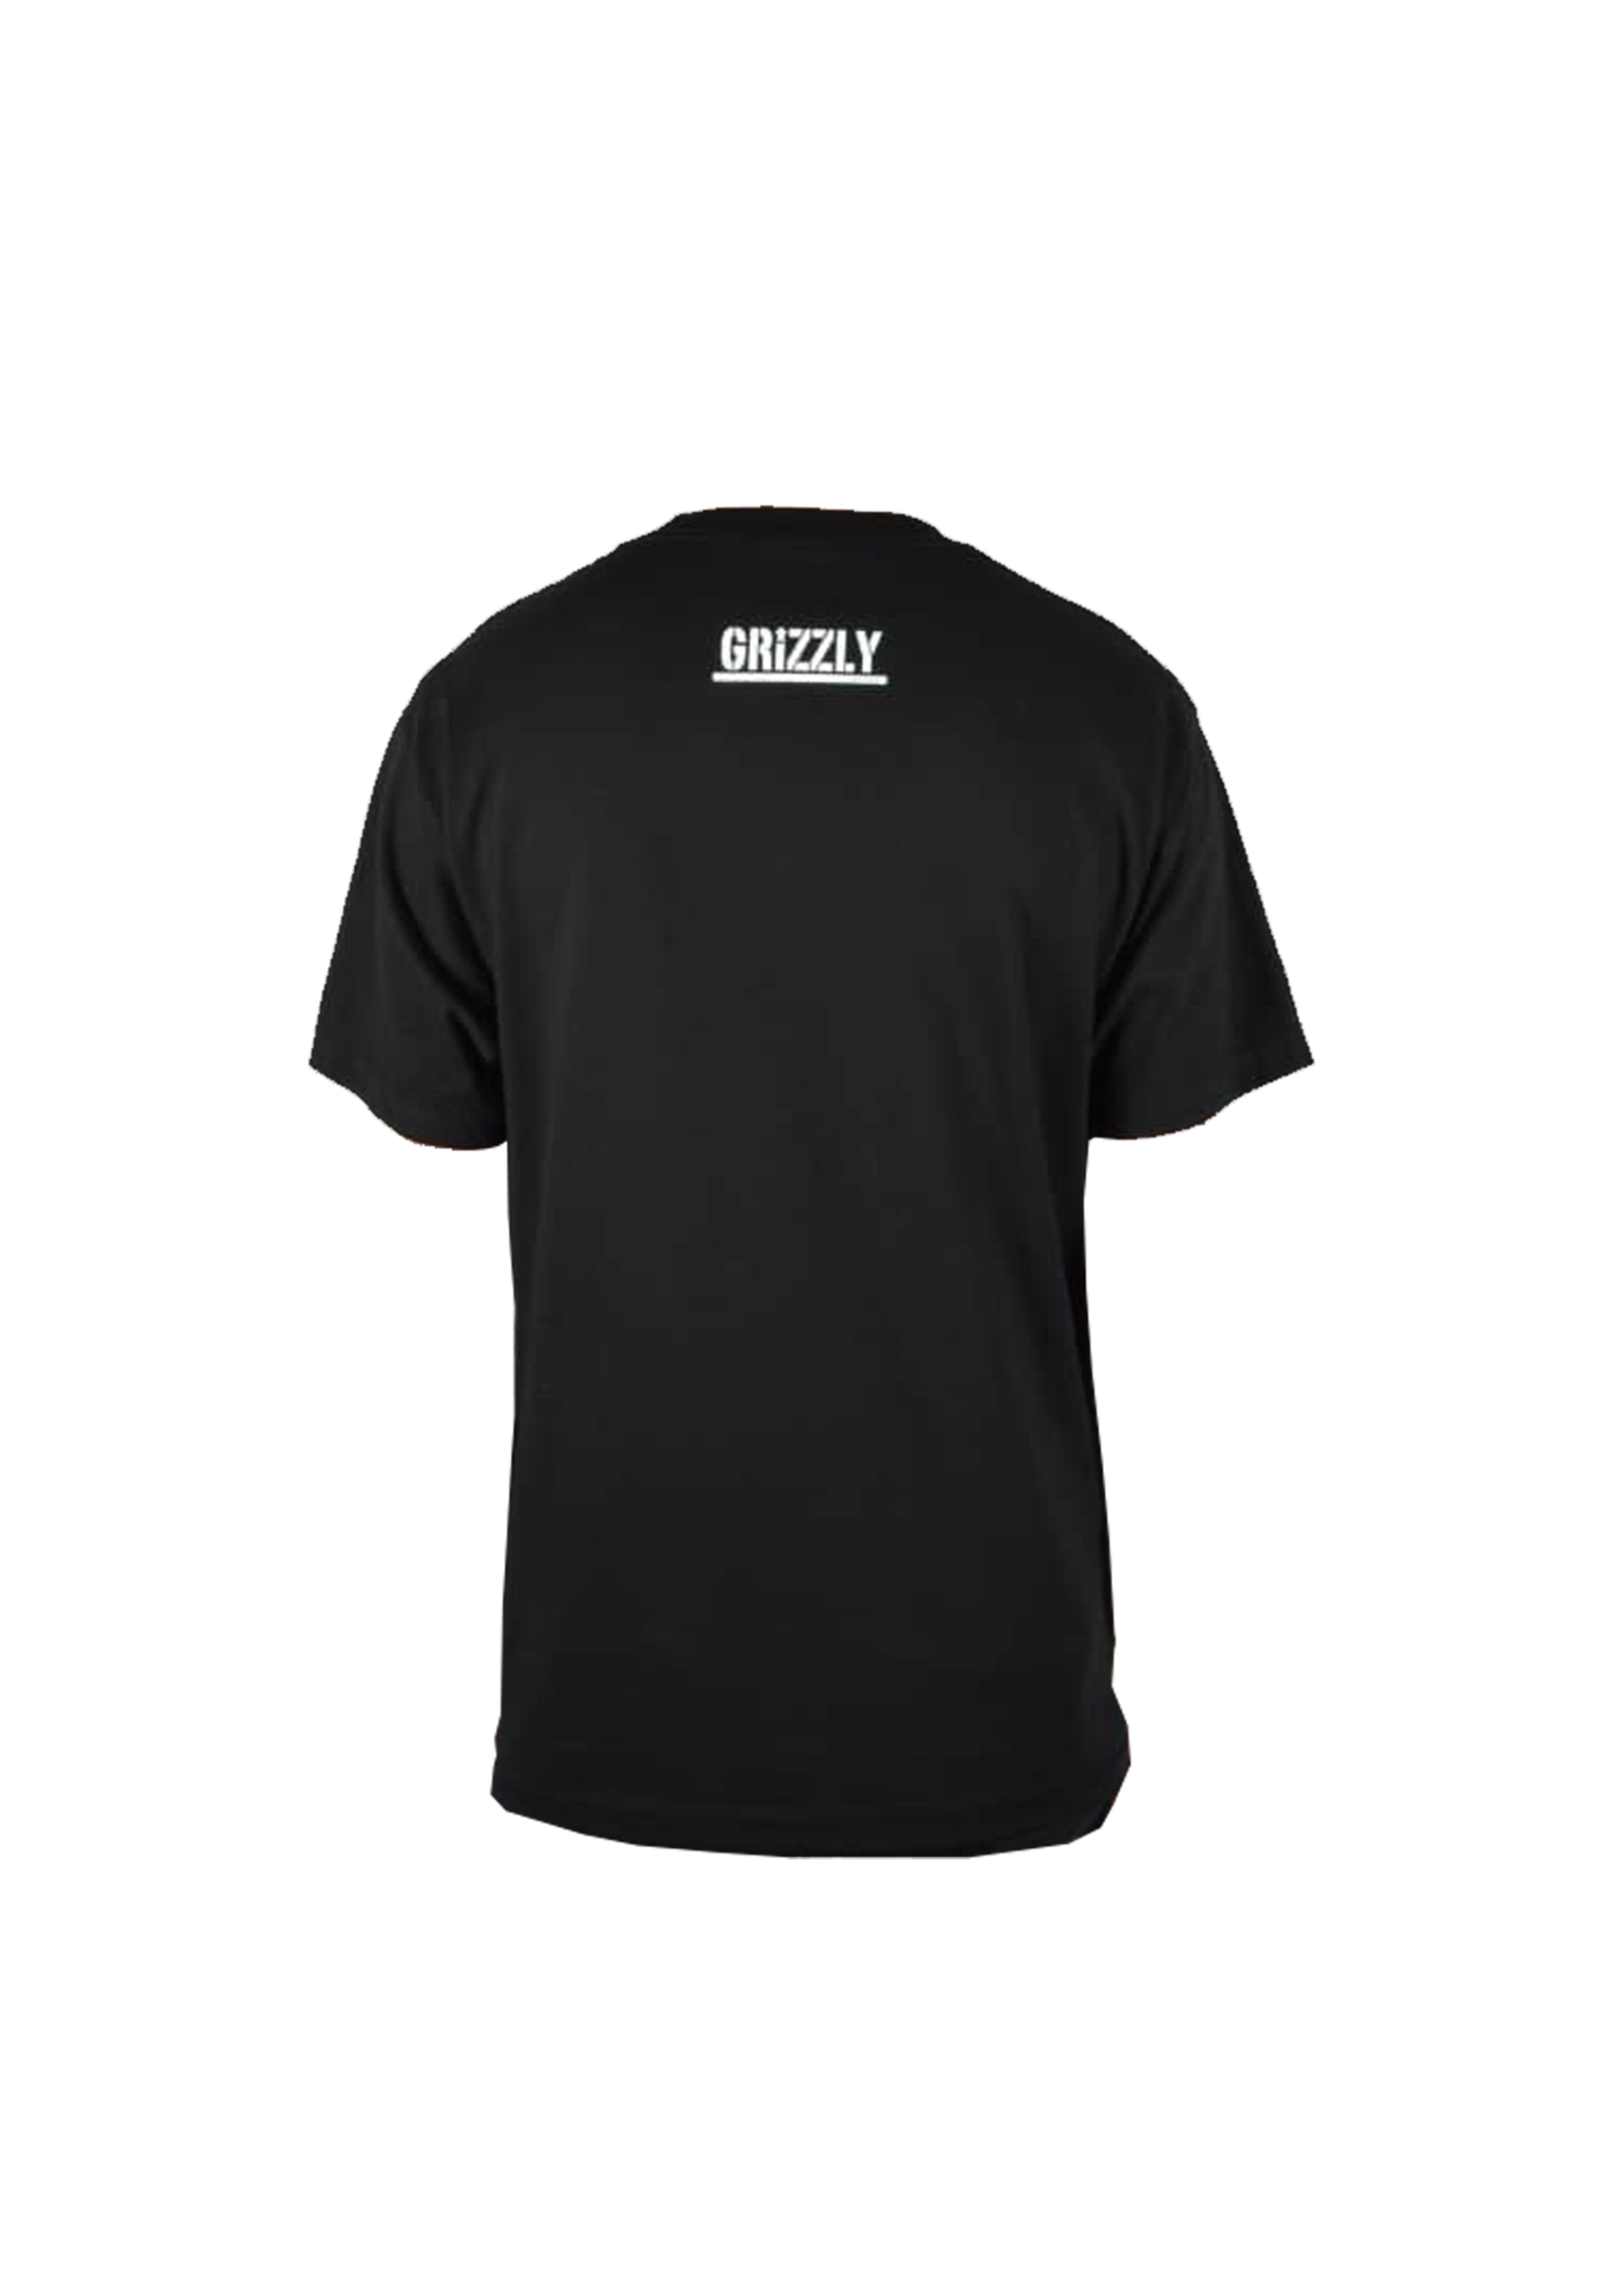 Grizzly Grizzly - Linescape Skate Youth T-Shirt - Black